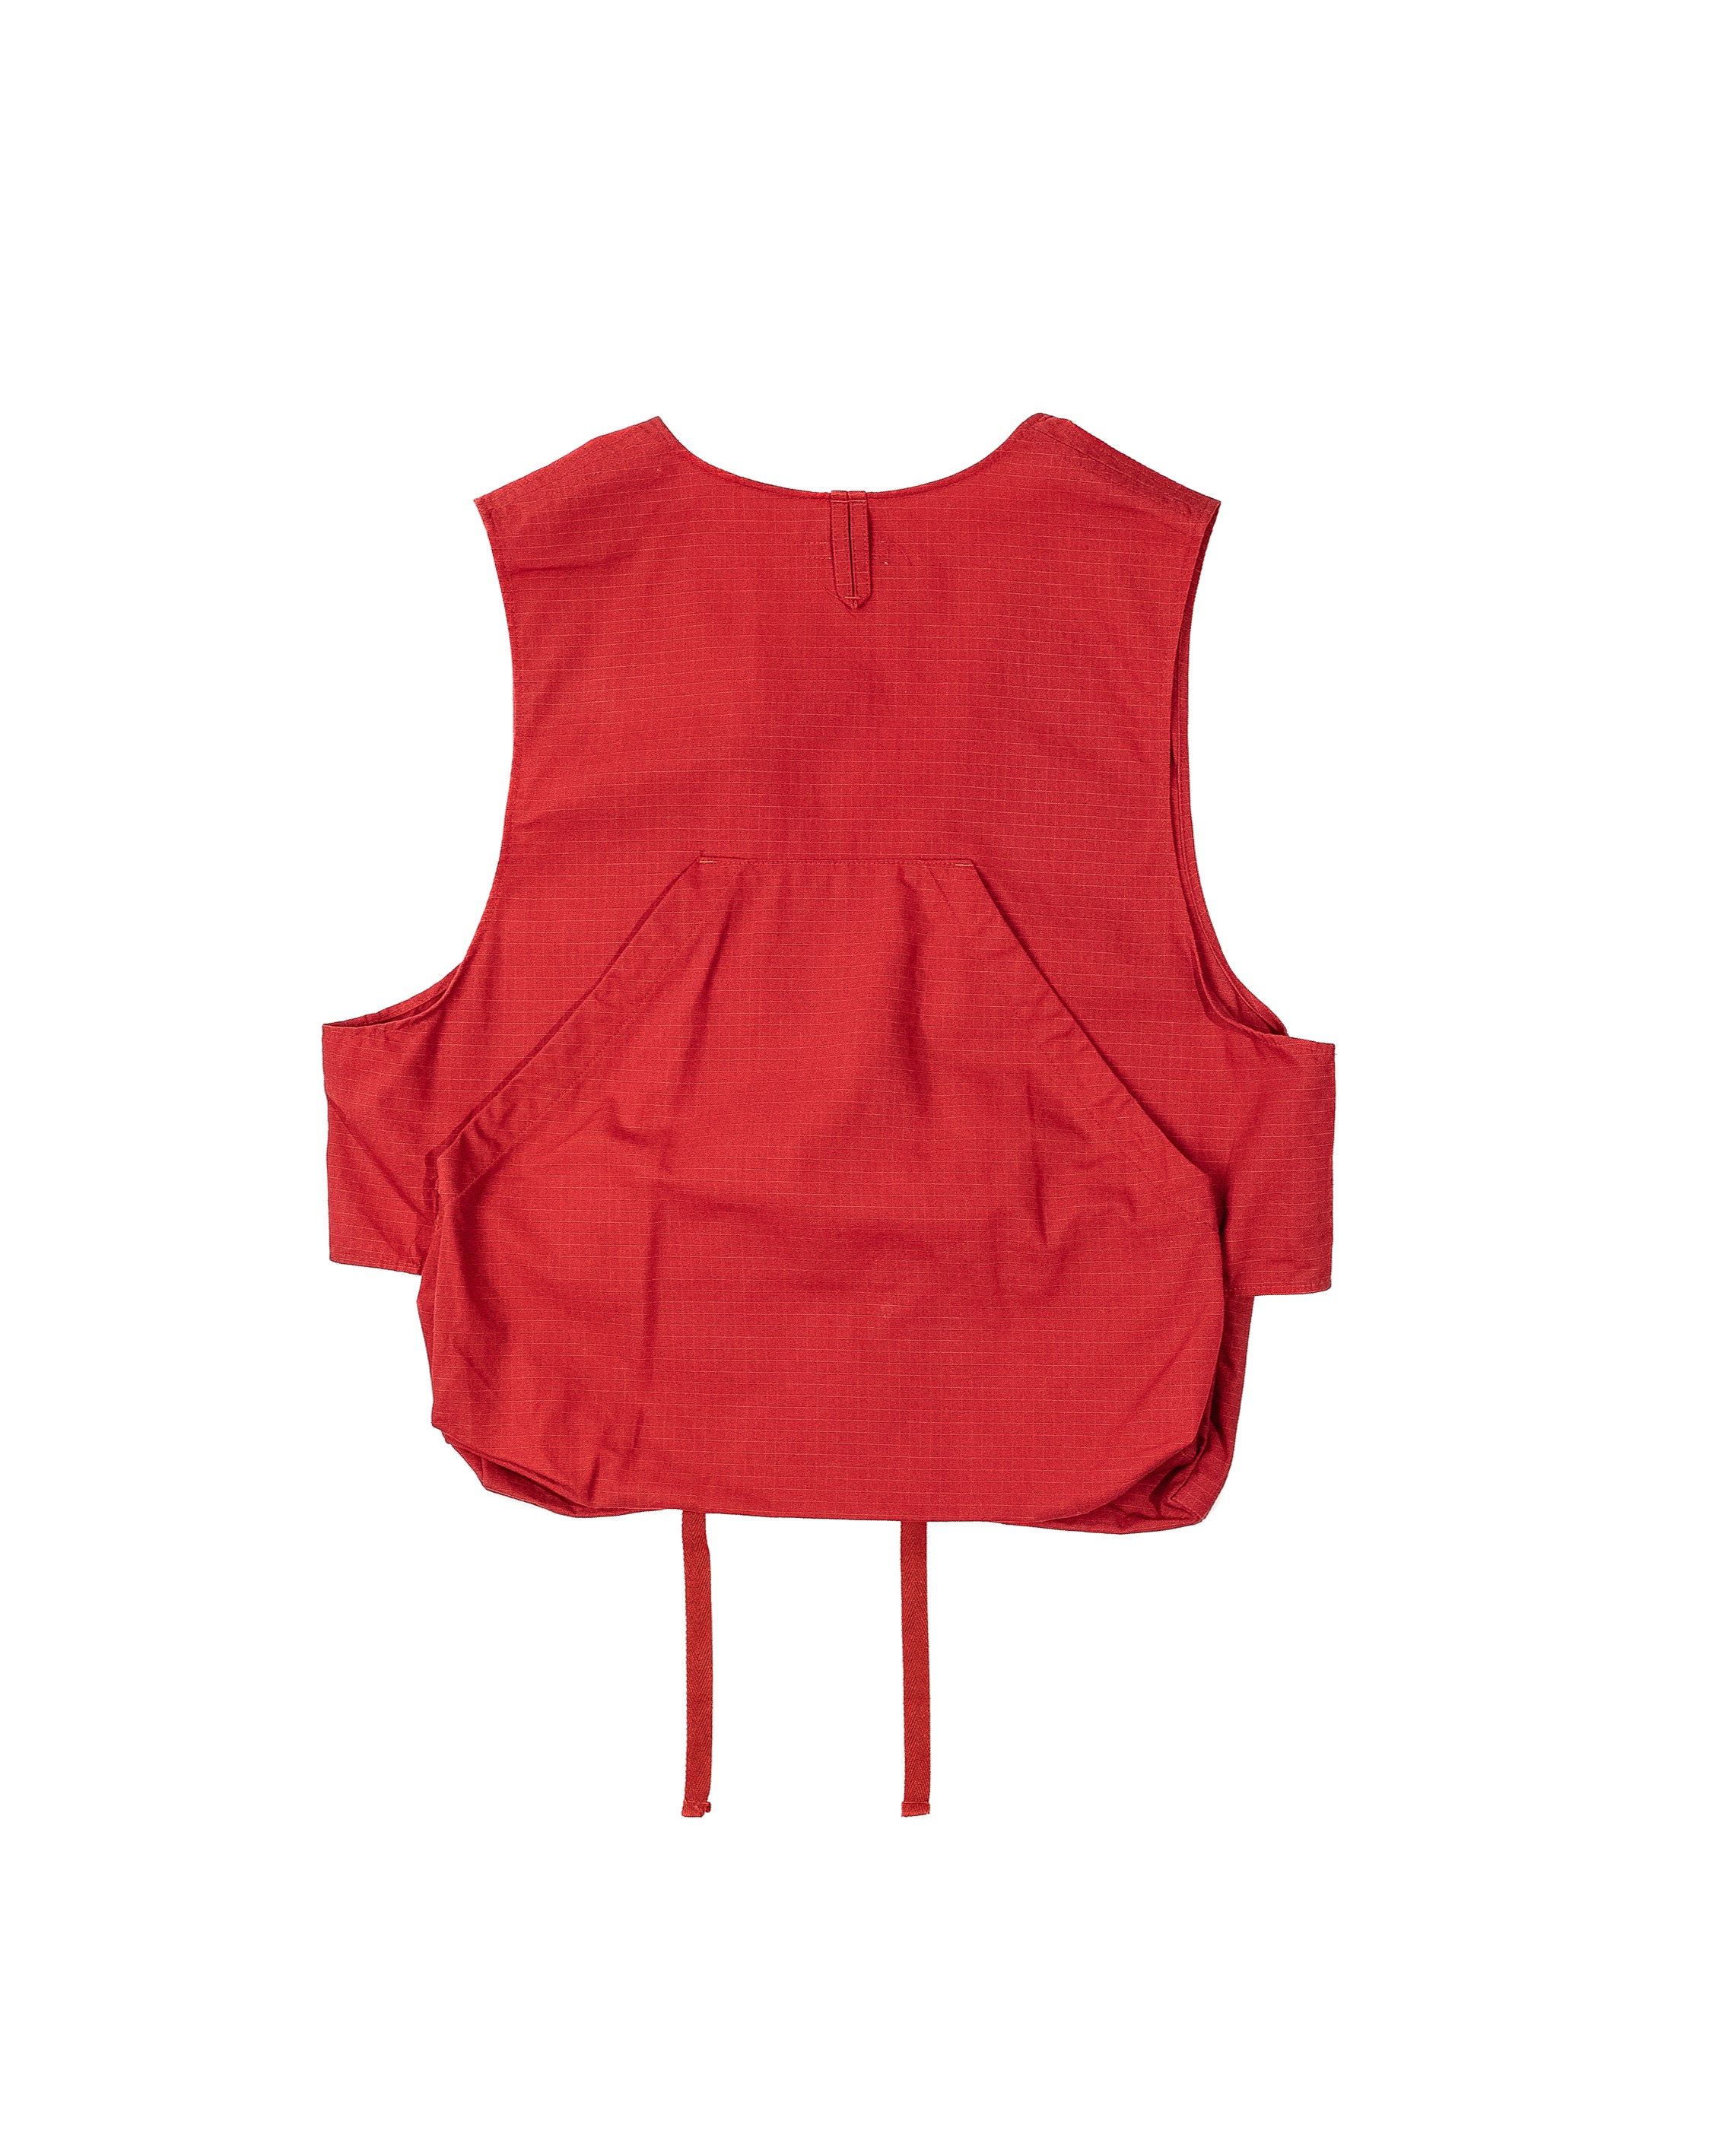 Fowl Vest - Red Cotton Ripstop